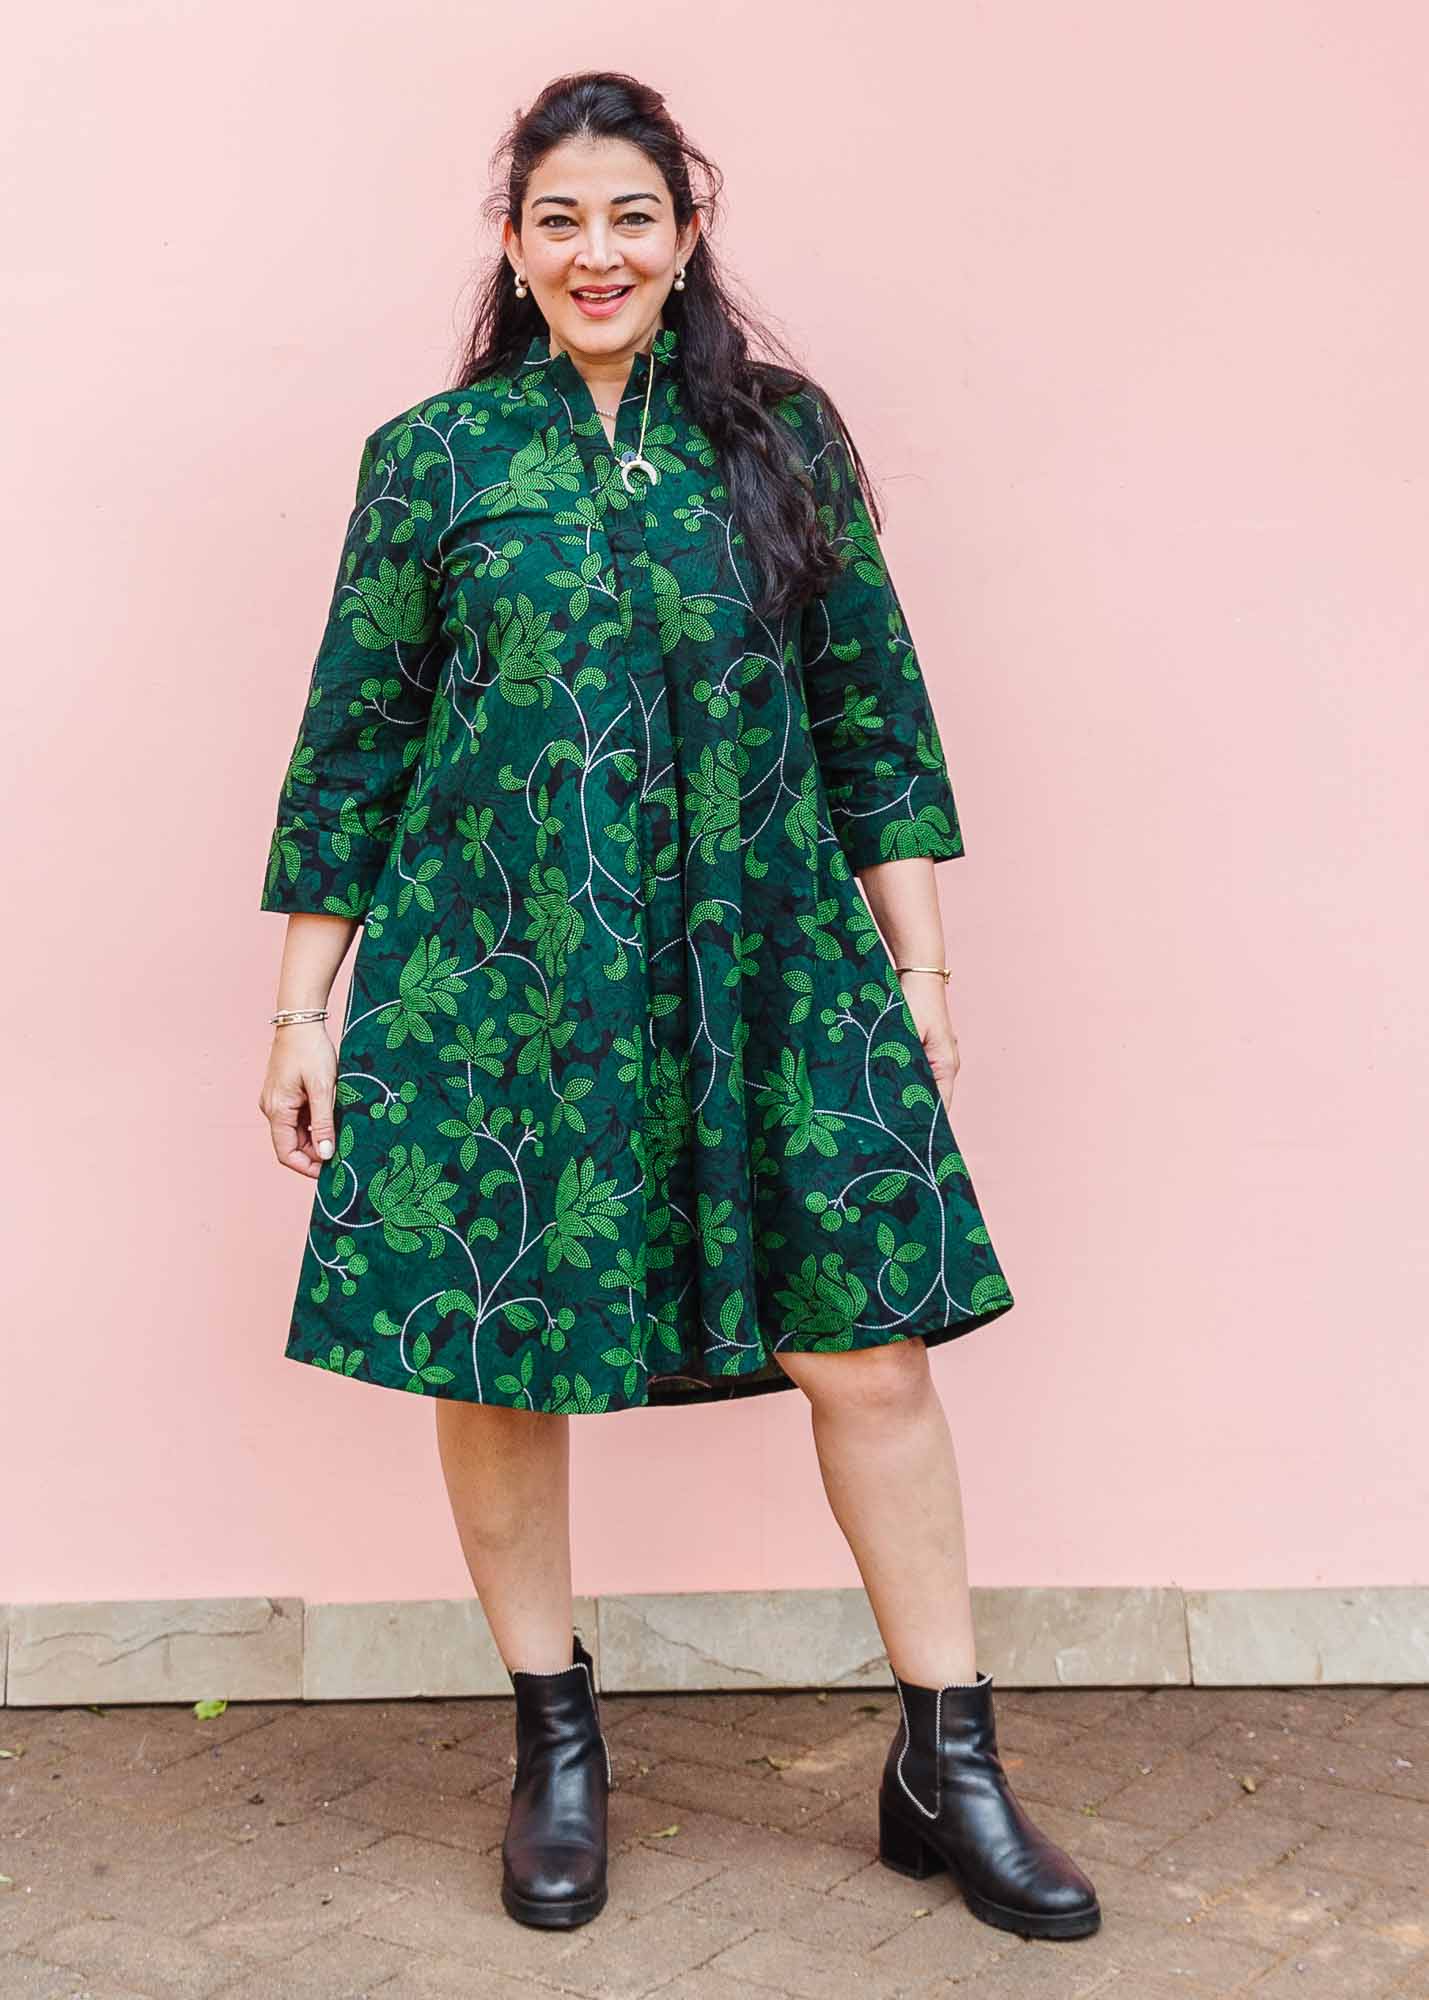 The model is wearing black and forest green dress with lime green and white floral print